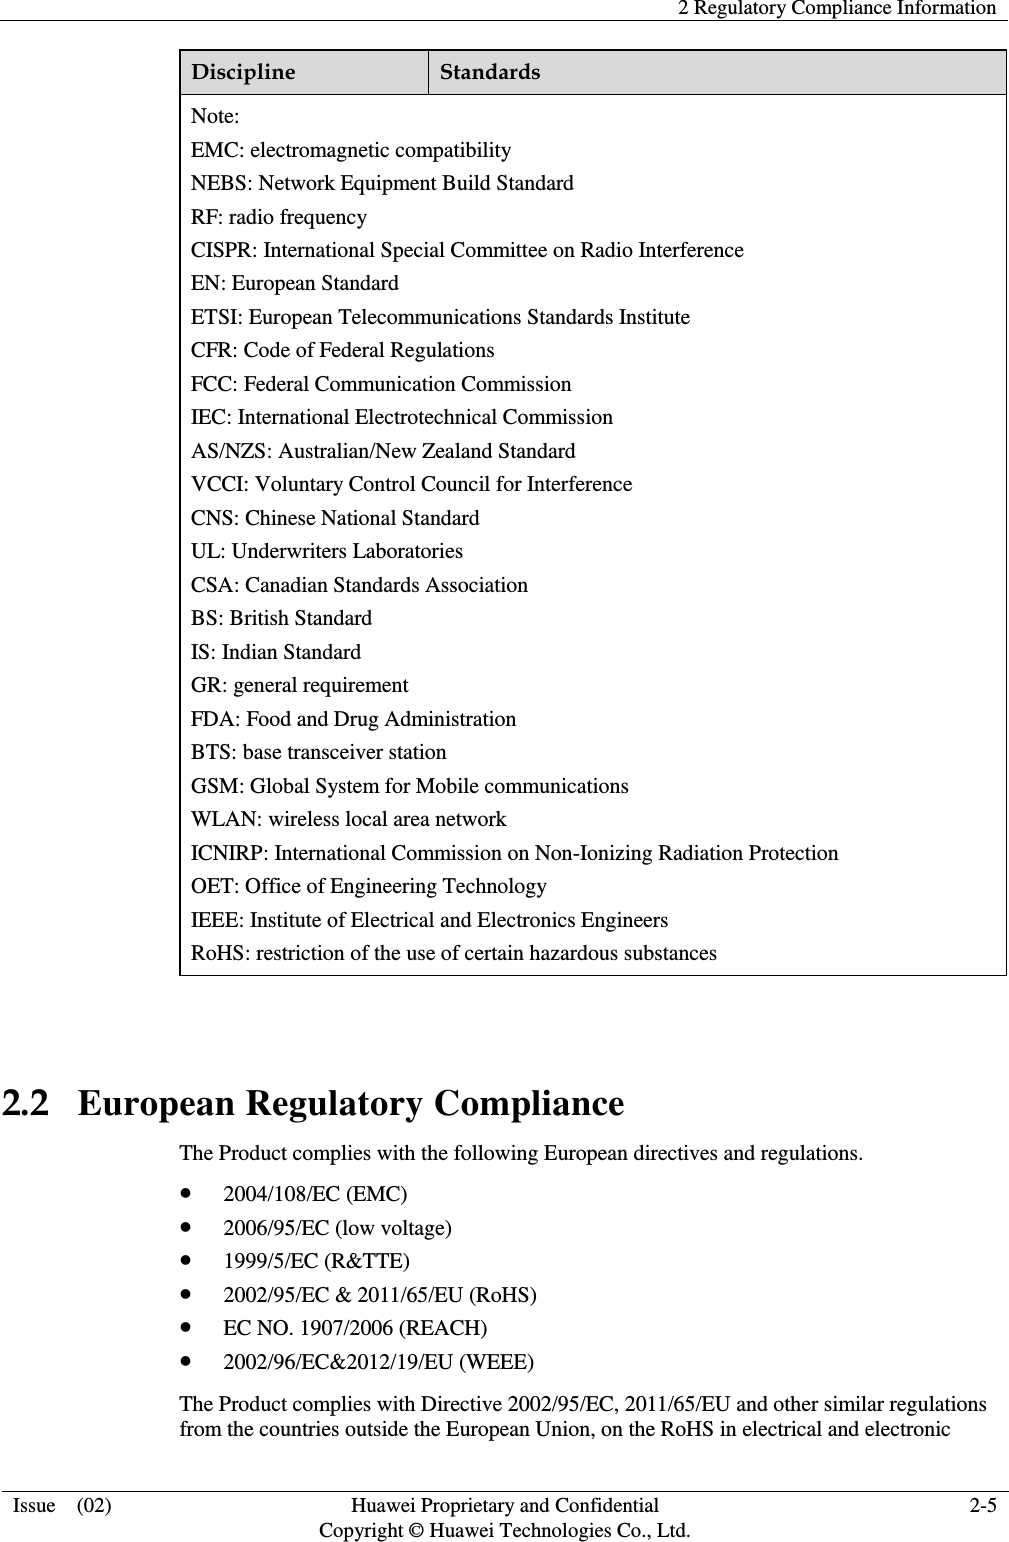   2 Regulatory Compliance Information  Issue    (02) Huawei Proprietary and Confidential         Copyright © Huawei Technologies Co., Ltd. 2-5  Discipline Standards Note: EMC: electromagnetic compatibility NEBS: Network Equipment Build Standard RF: radio frequency CISPR: International Special Committee on Radio Interference EN: European Standard ETSI: European Telecommunications Standards Institute CFR: Code of Federal Regulations FCC: Federal Communication Commission IEC: International Electrotechnical Commission AS/NZS: Australian/New Zealand Standard VCCI: Voluntary Control Council for Interference CNS: Chinese National Standard UL: Underwriters Laboratories CSA: Canadian Standards Association BS: British Standard IS: Indian Standard GR: general requirement FDA: Food and Drug Administration BTS: base transceiver station GSM: Global System for Mobile communications WLAN: wireless local area network ICNIRP: International Commission on Non-Ionizing Radiation Protection OET: Office of Engineering Technology IEEE: Institute of Electrical and Electronics Engineers RoHS: restriction of the use of certain hazardous substances  2.2   European Regulatory Compliance The Product complies with the following European directives and regulations.  2004/108/EC (EMC)  2006/95/EC (low voltage)  1999/5/EC (R&amp;TTE)  2002/95/EC &amp; 2011/65/EU (RoHS)  EC NO. 1907/2006 (REACH)  2002/96/EC&amp;2012/19/EU (WEEE) The Product complies with Directive 2002/95/EC, 2011/65/EU and other similar regulations from the countries outside the European Union, on the RoHS in electrical and electronic 